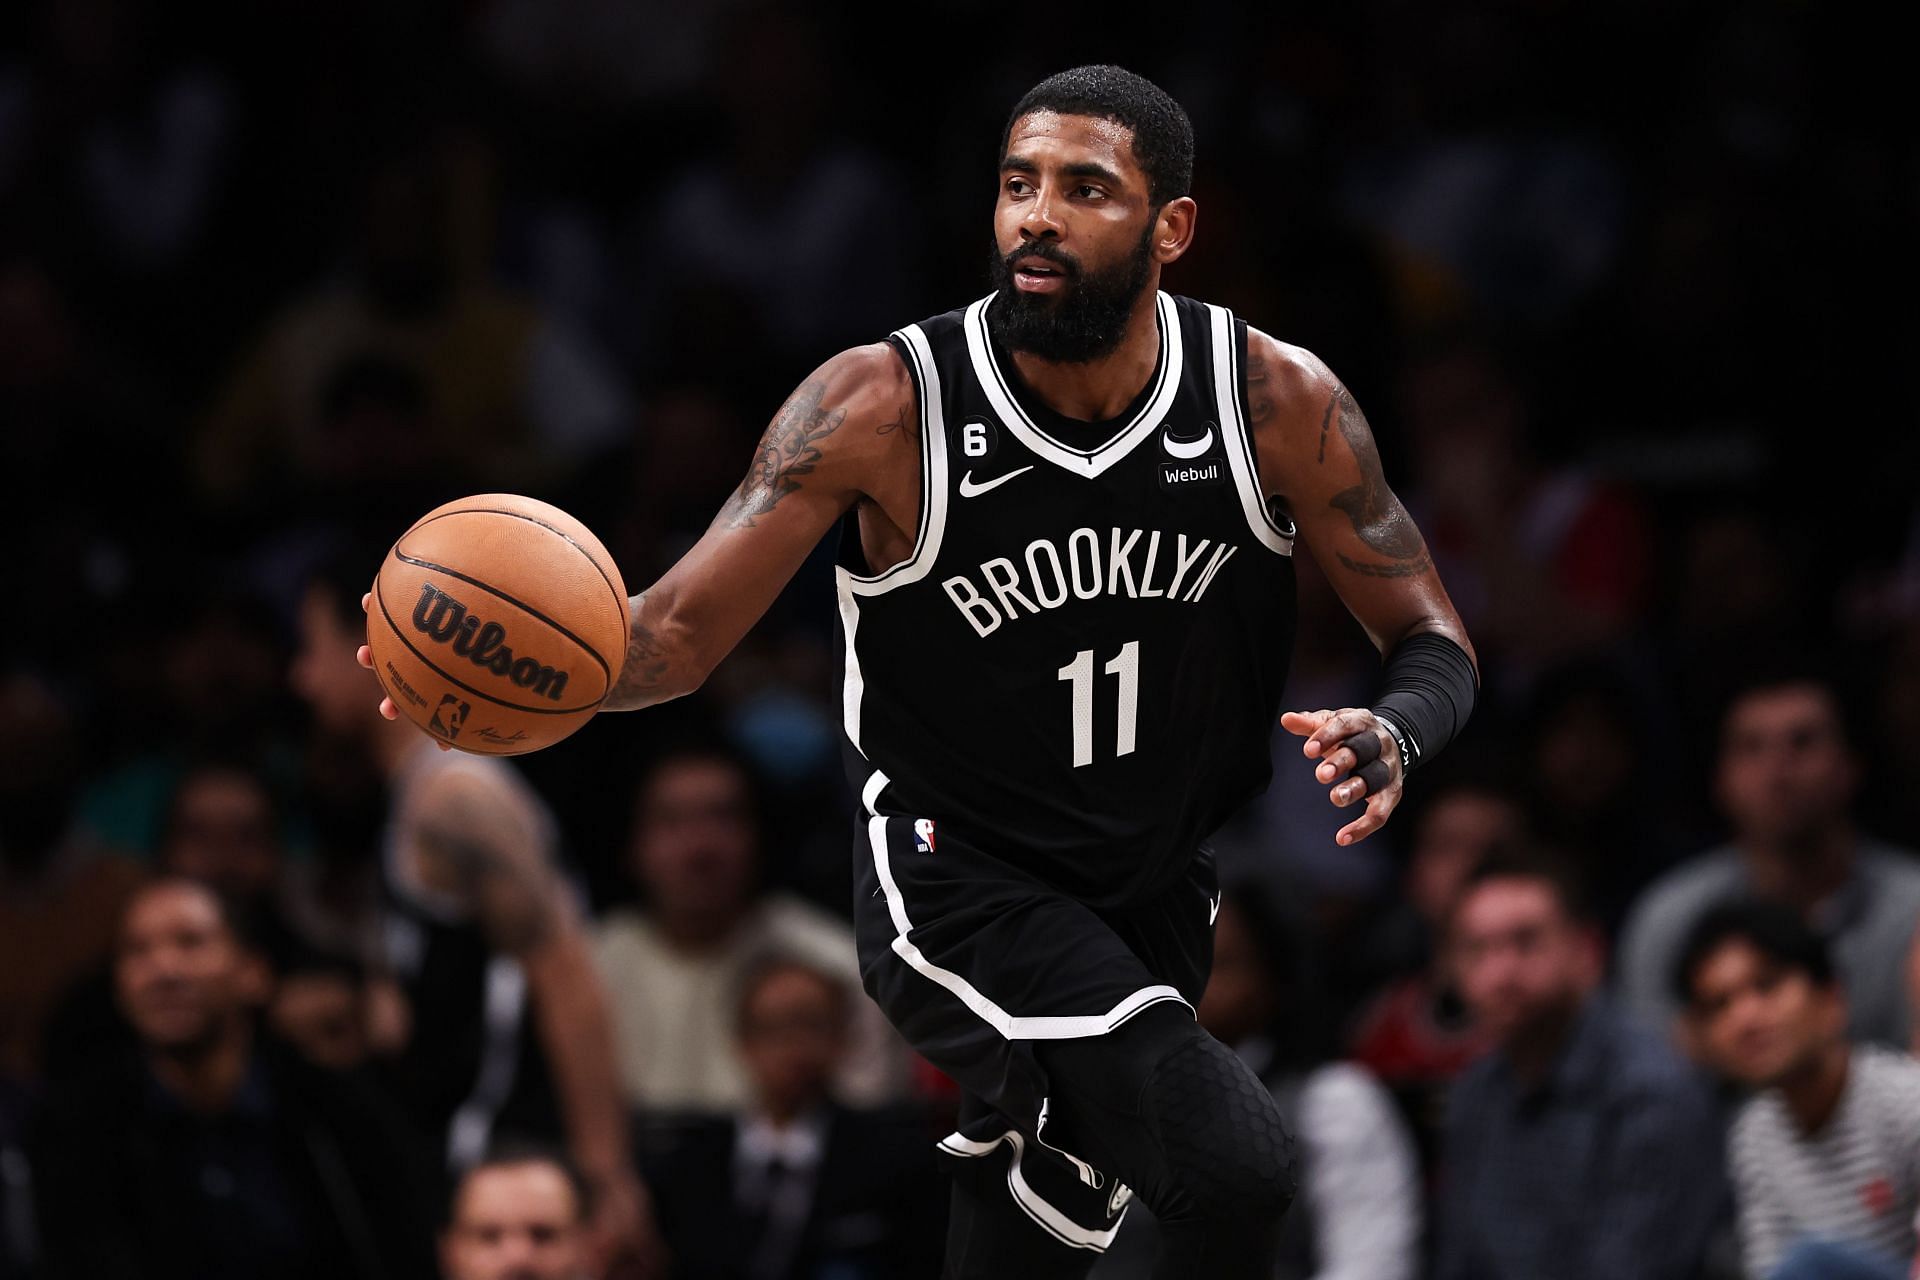 Kyrie Irving of the Brooklyn Nets